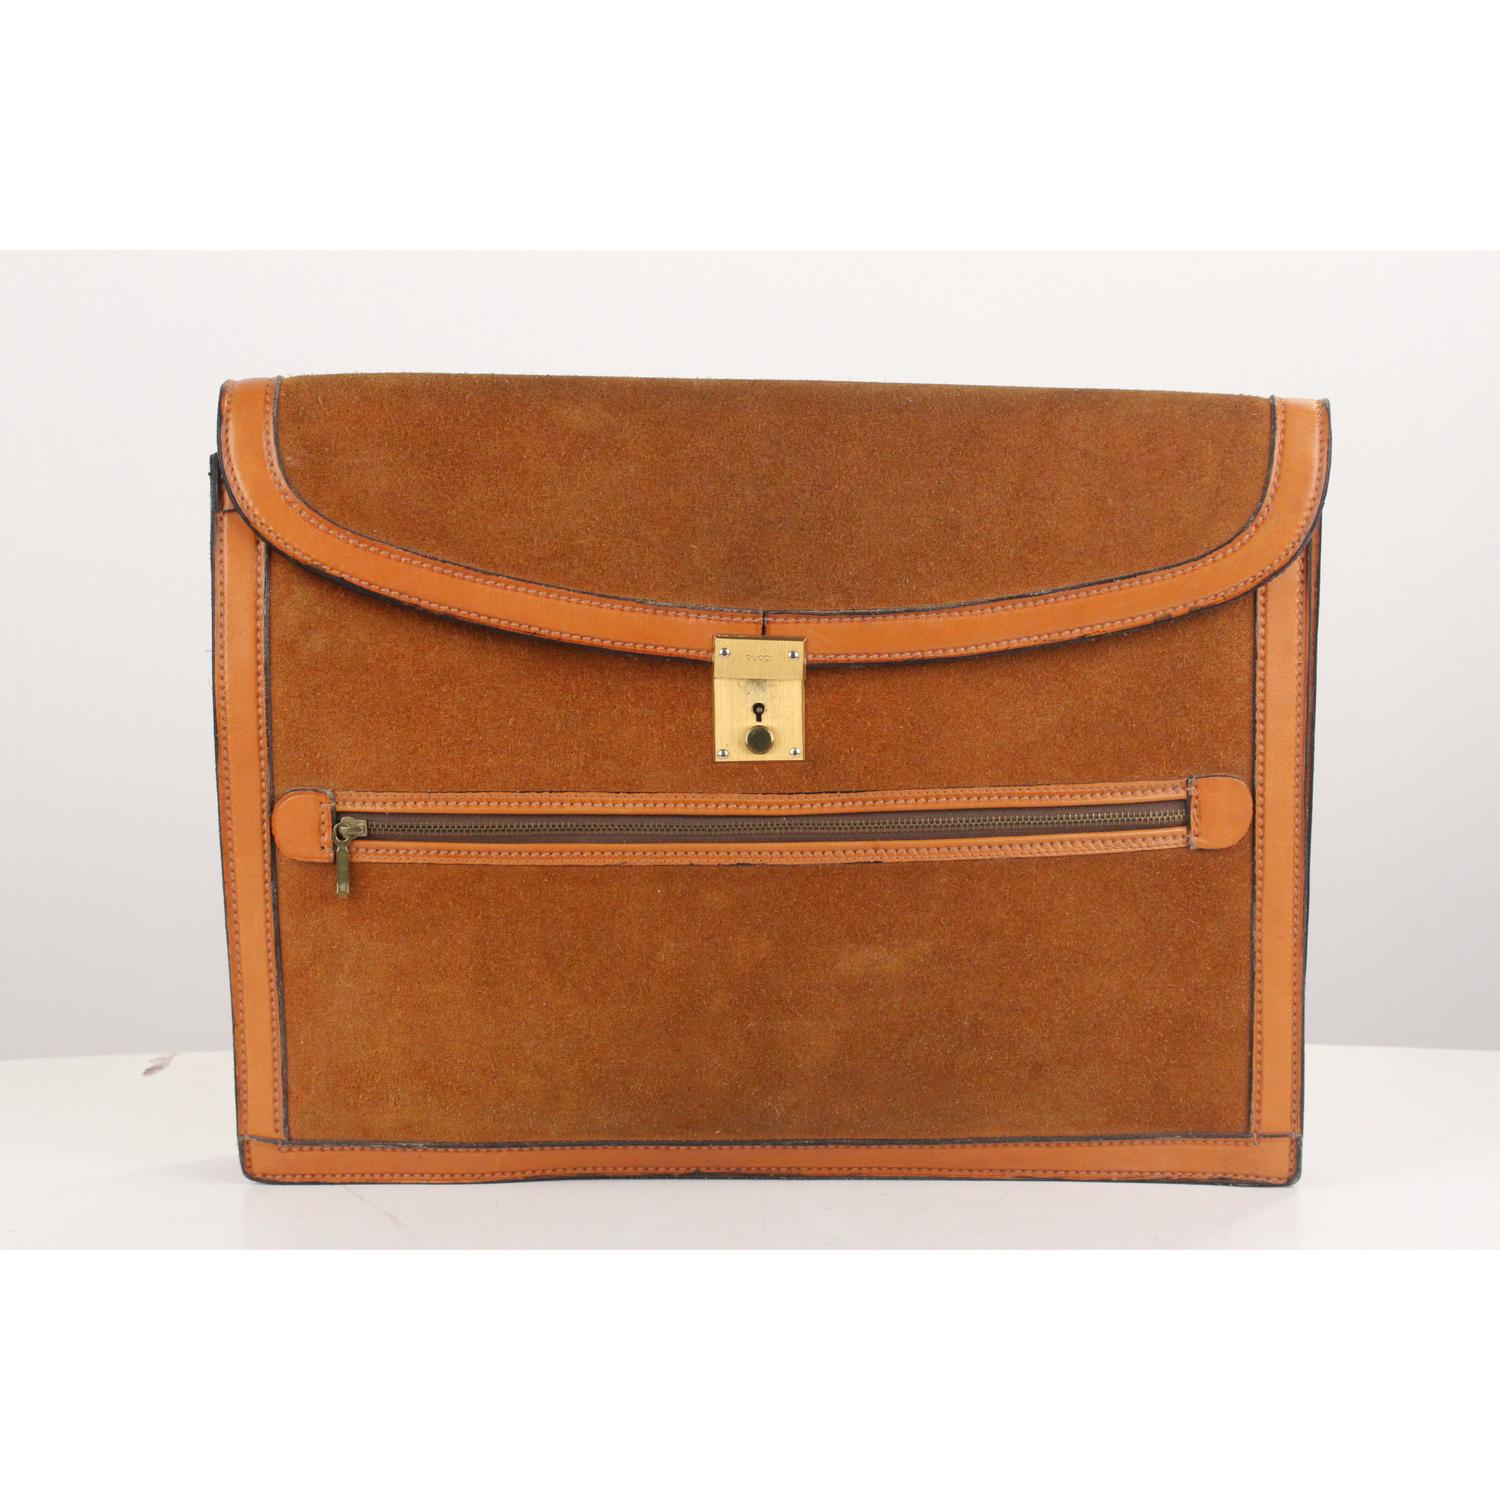 - Vintage Gucci tan suede leather flap  portfolio - Flap with key closure (key is included) - GUCCI signature engraved on the closure - 1 front zip pocket - 2 main compartments  - Leather and canvas lining  - 'Made in Italy by GUCCI' embossed inside.